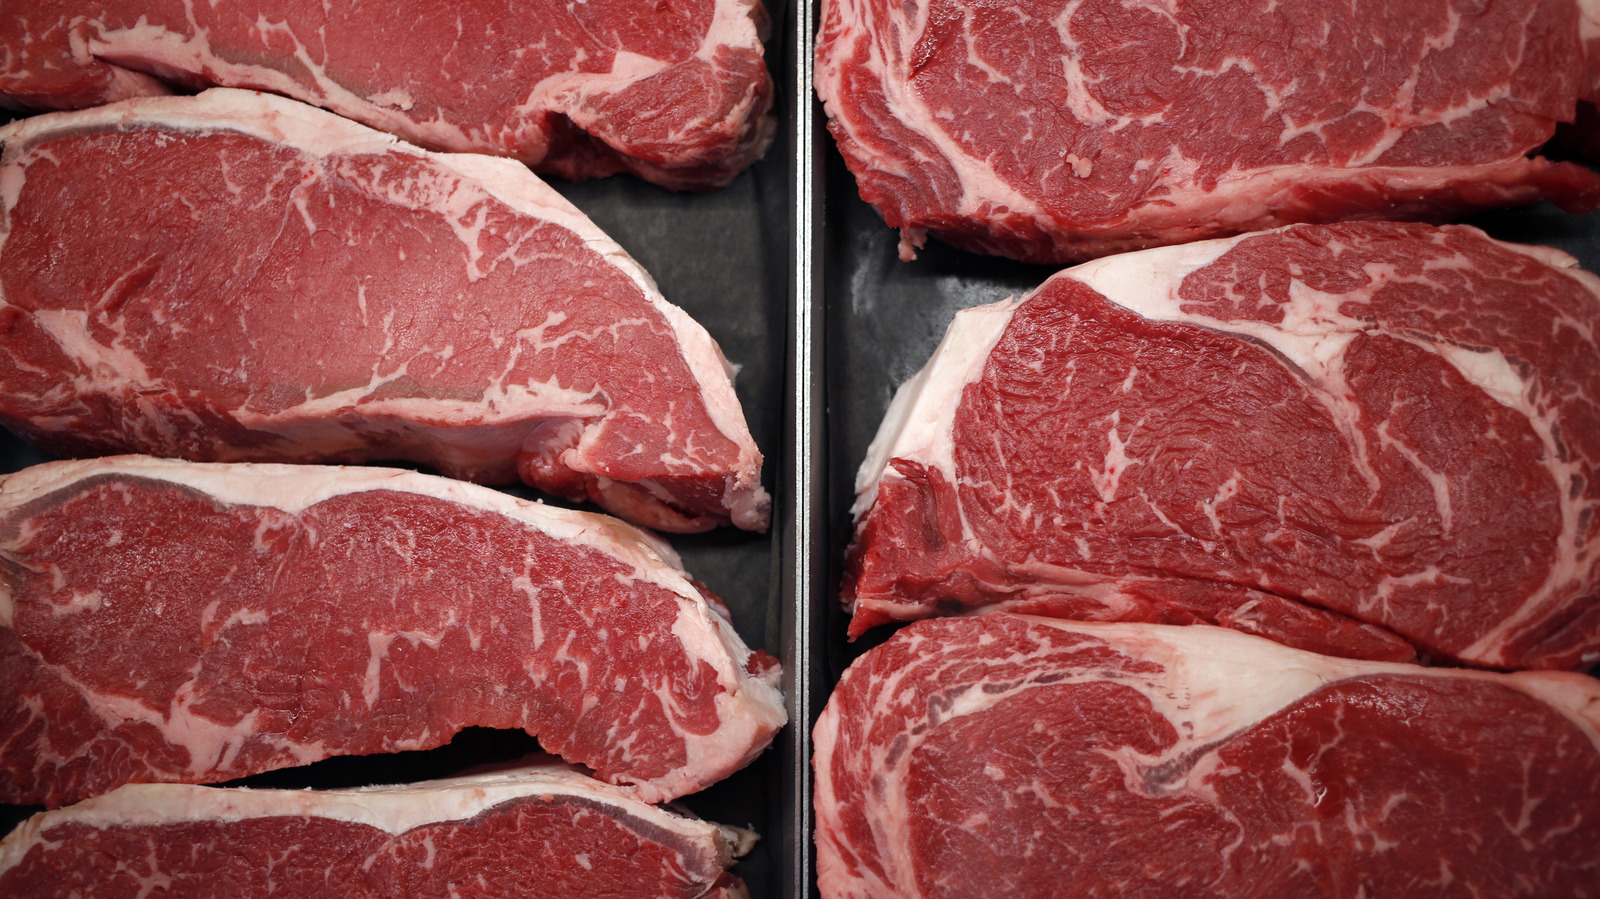 What Is The Red Liquid In Your Meat Packaging Anyway?